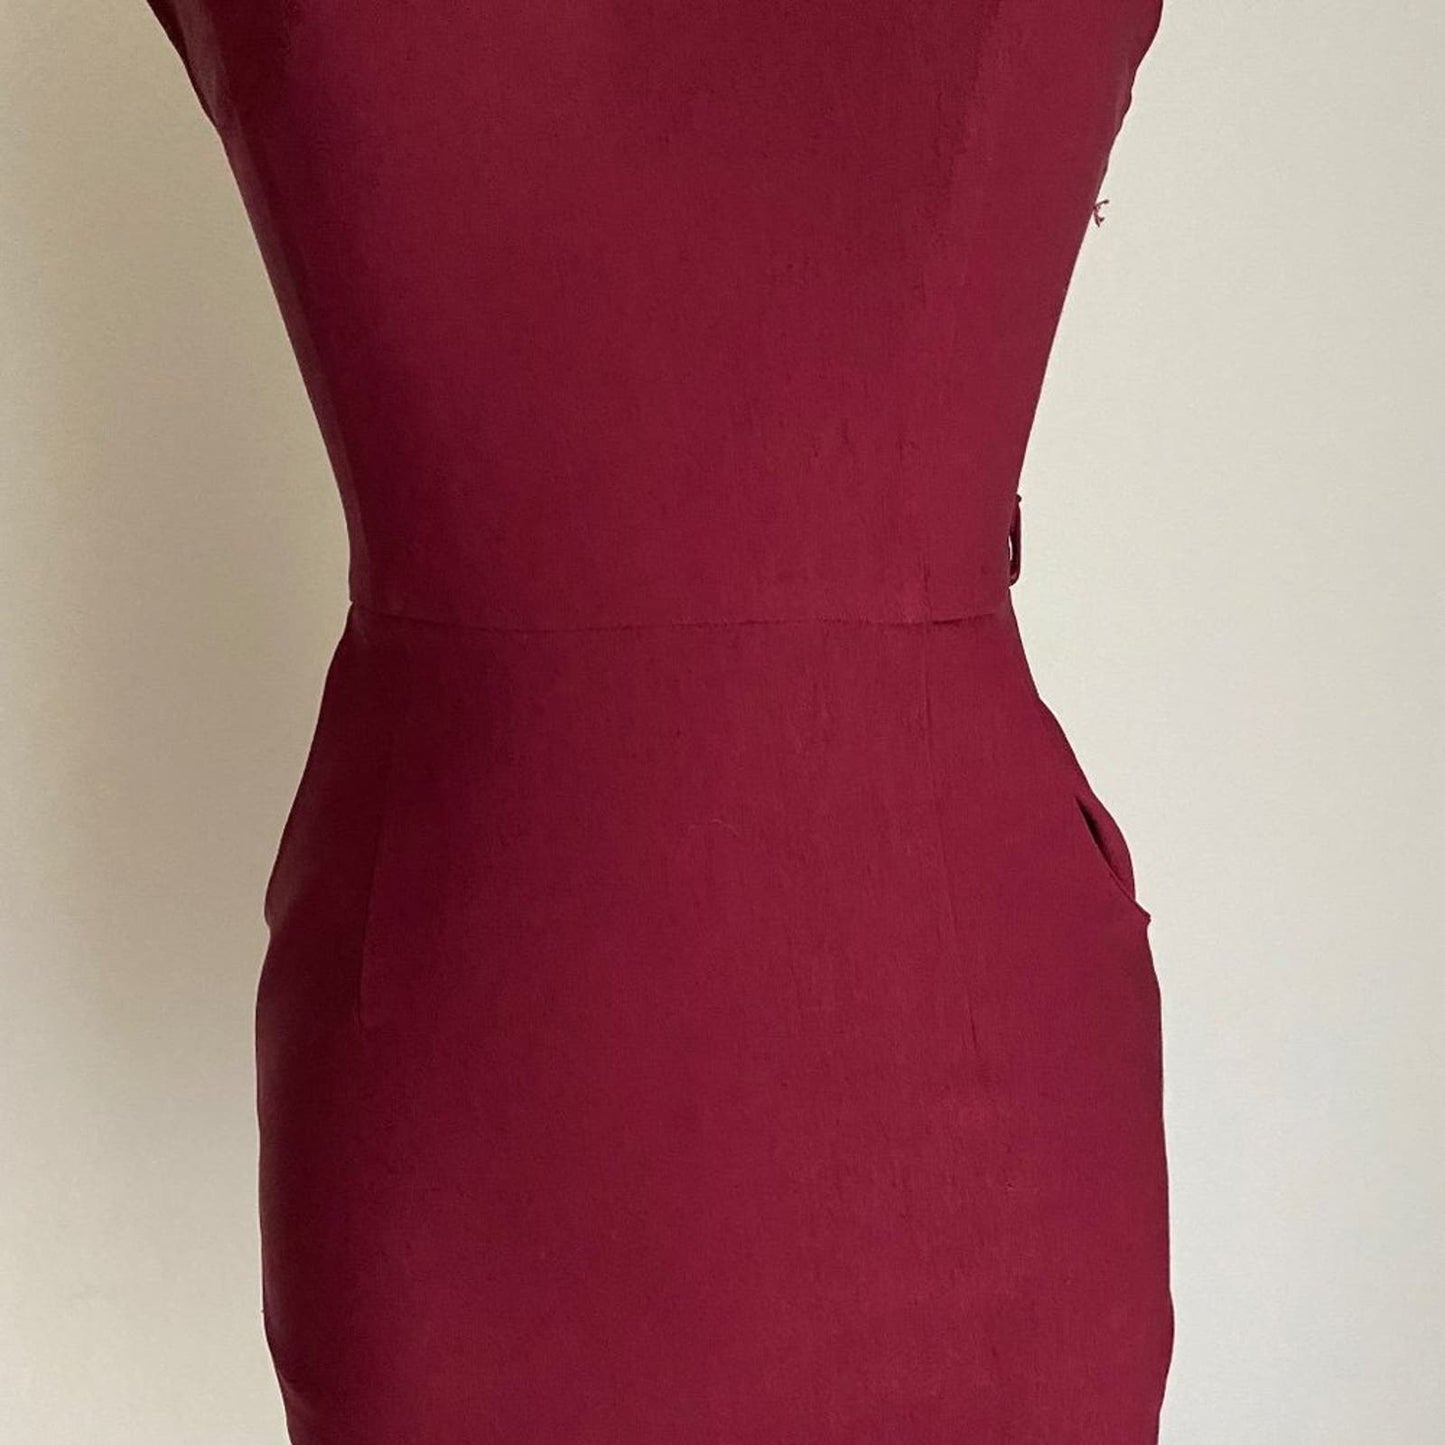 Foreign Exchange sz S burgundy fitted party short mini dress